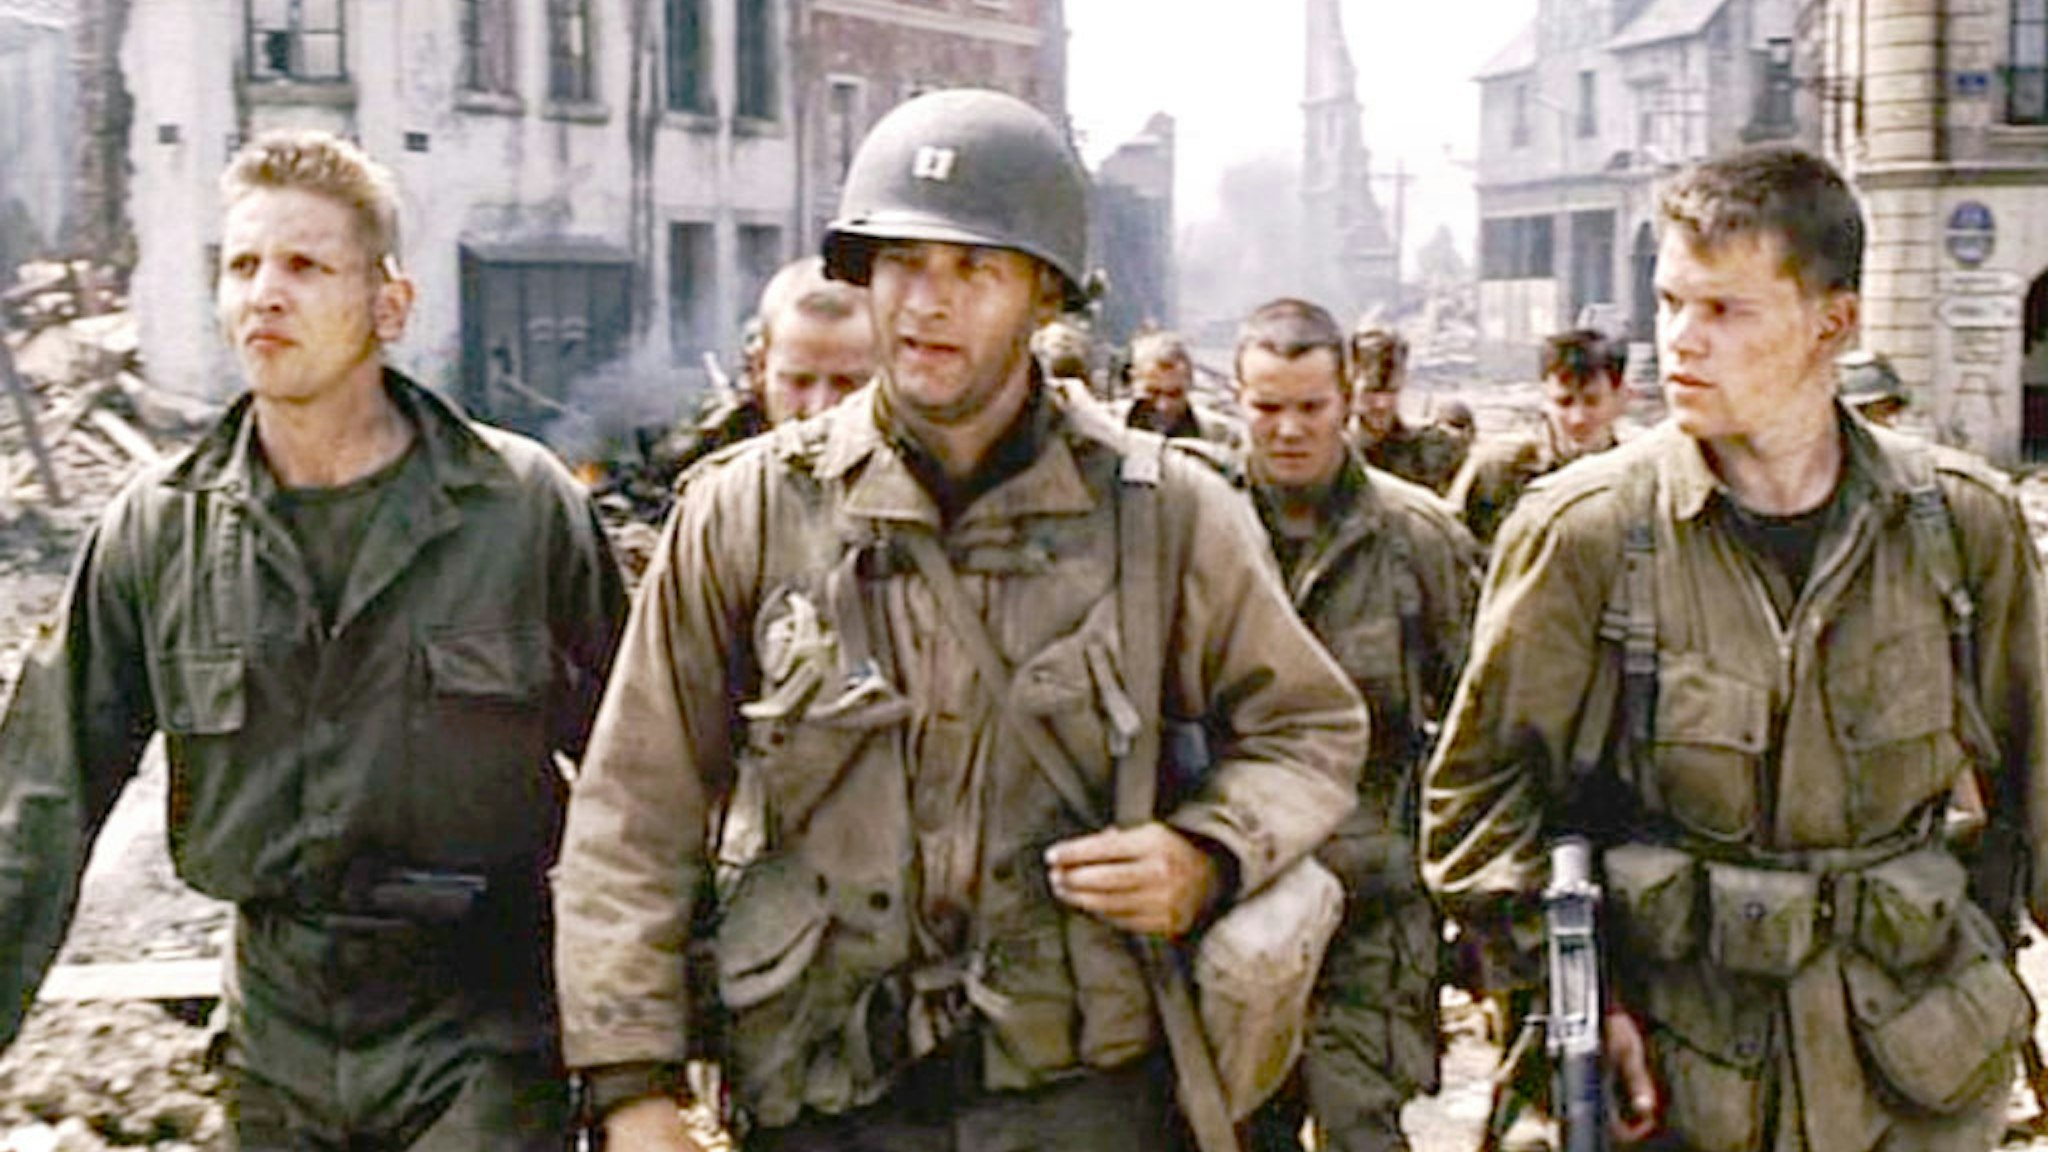 LOS ANGELES - JULY 24: The movie "Saving Private Ryan", directed by Steven Spielberg. Seen here in front, from left, Barry Pepper (as Private Jackson), Tom Hanks (as Captain John Miller), and Matt Damon (as Private James Francis Ryan). Theatrical release July 24, 1998. Screen capture. A Paramount Picture. (Photo by CBS via Getty Images)